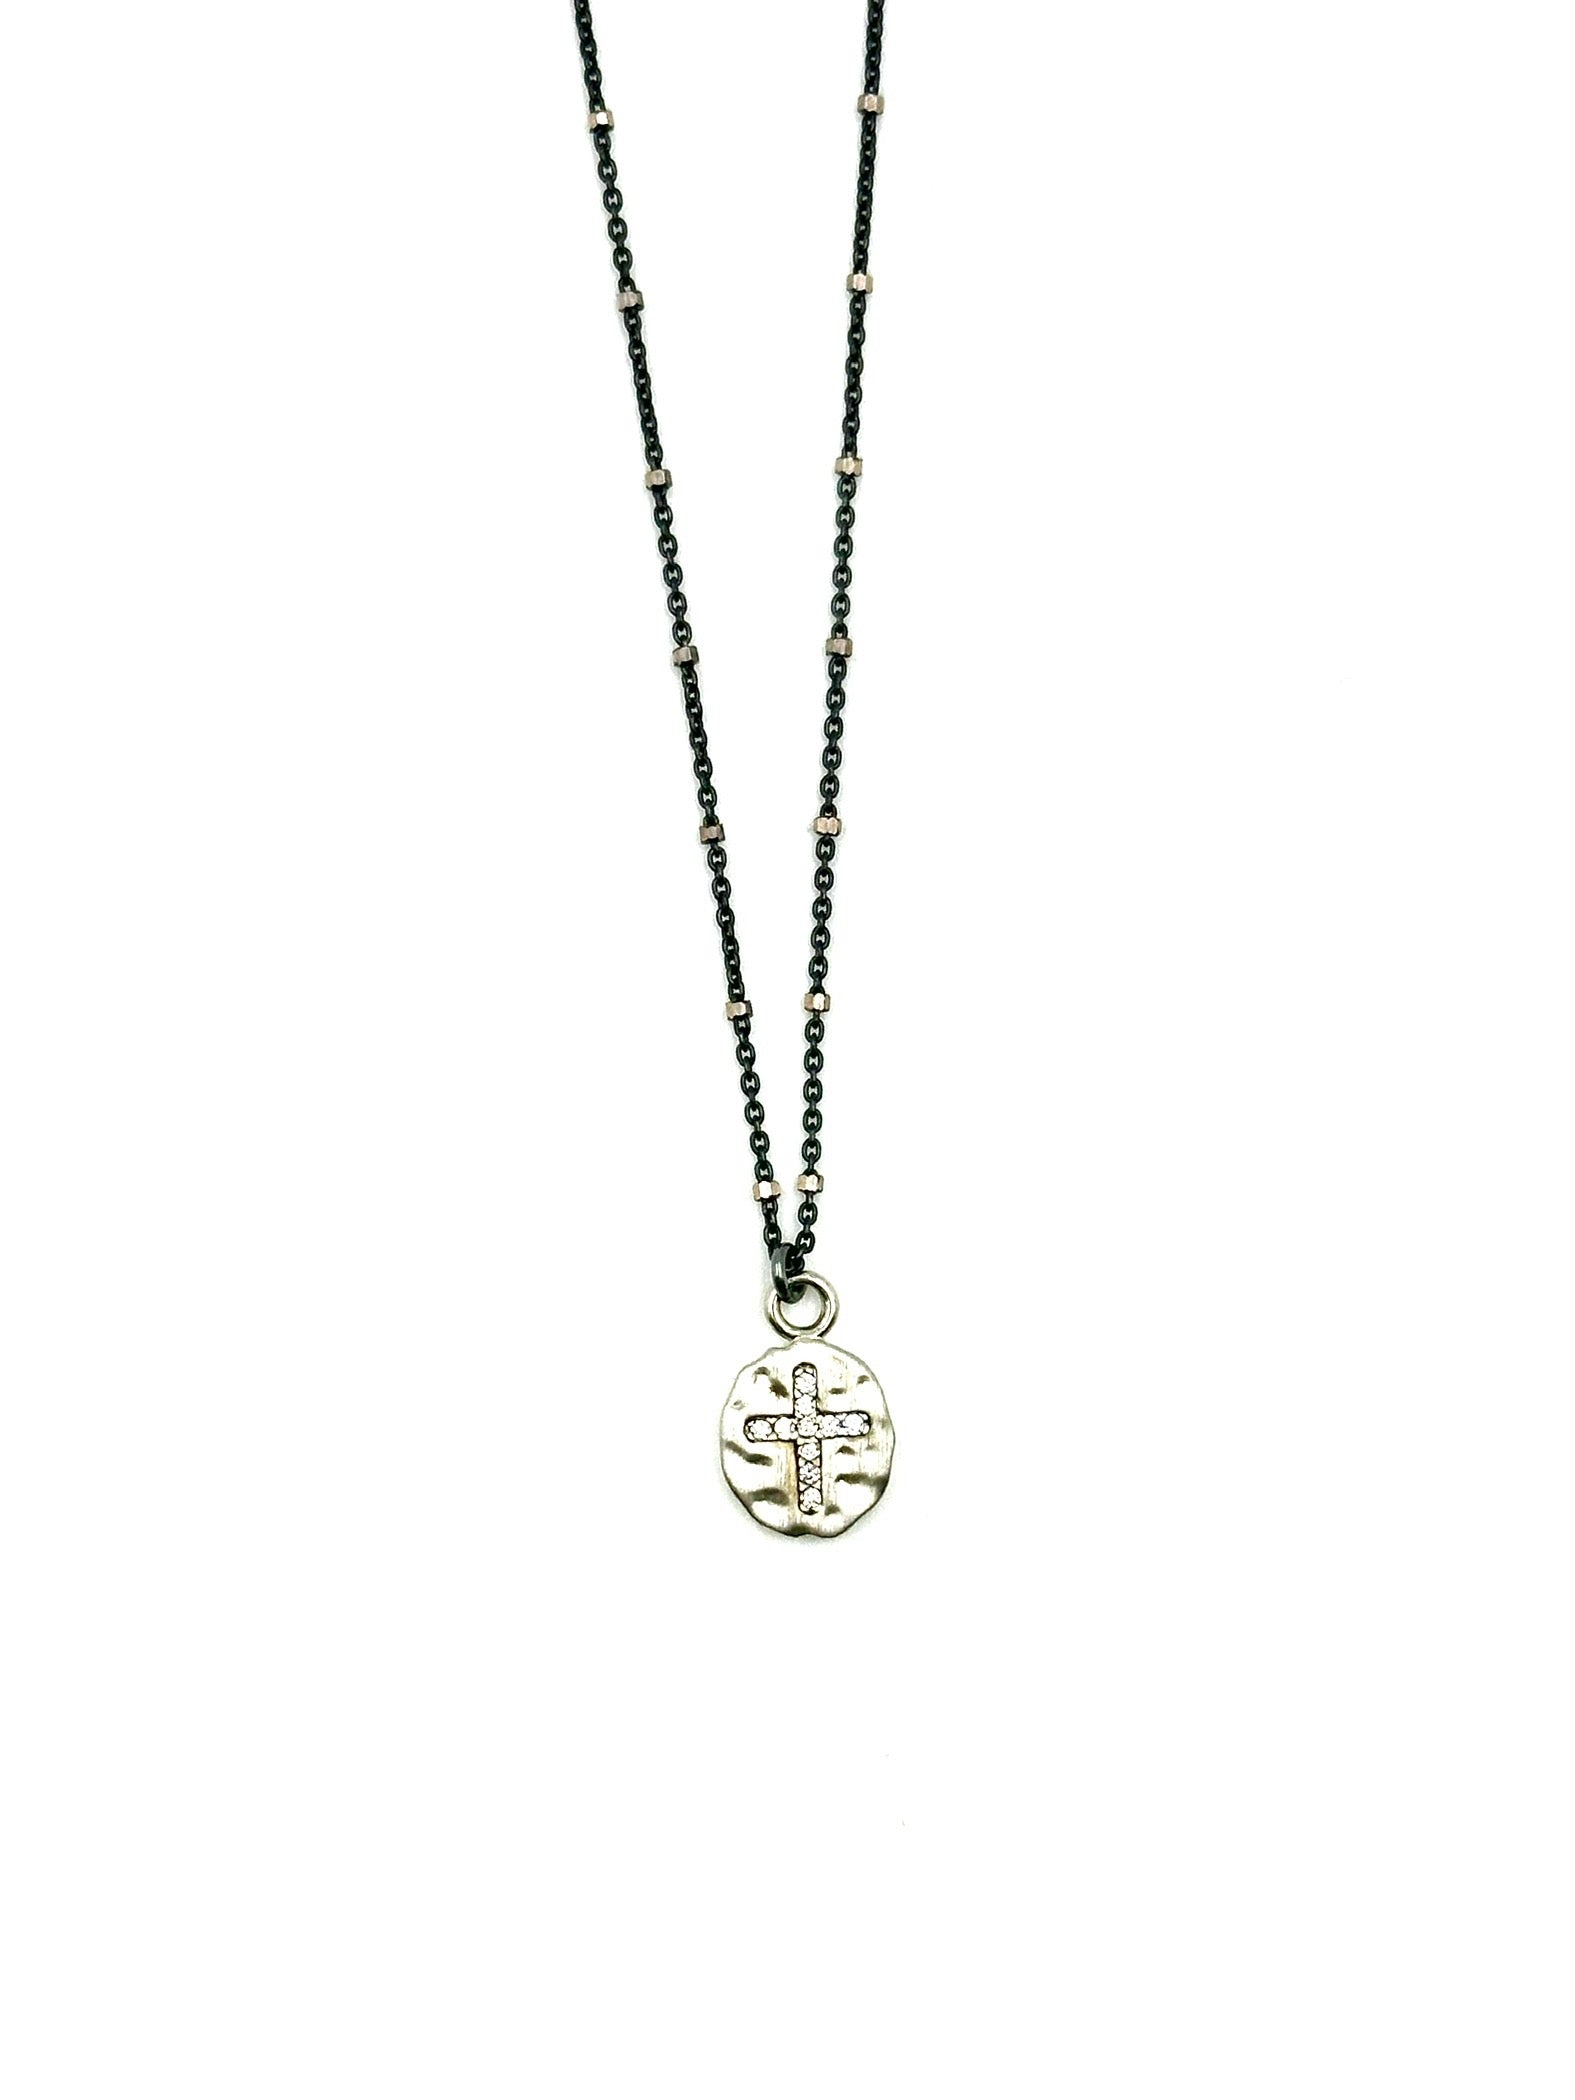 Spirit- Sterling silver/vermeil necklace with hammered cross disc charm